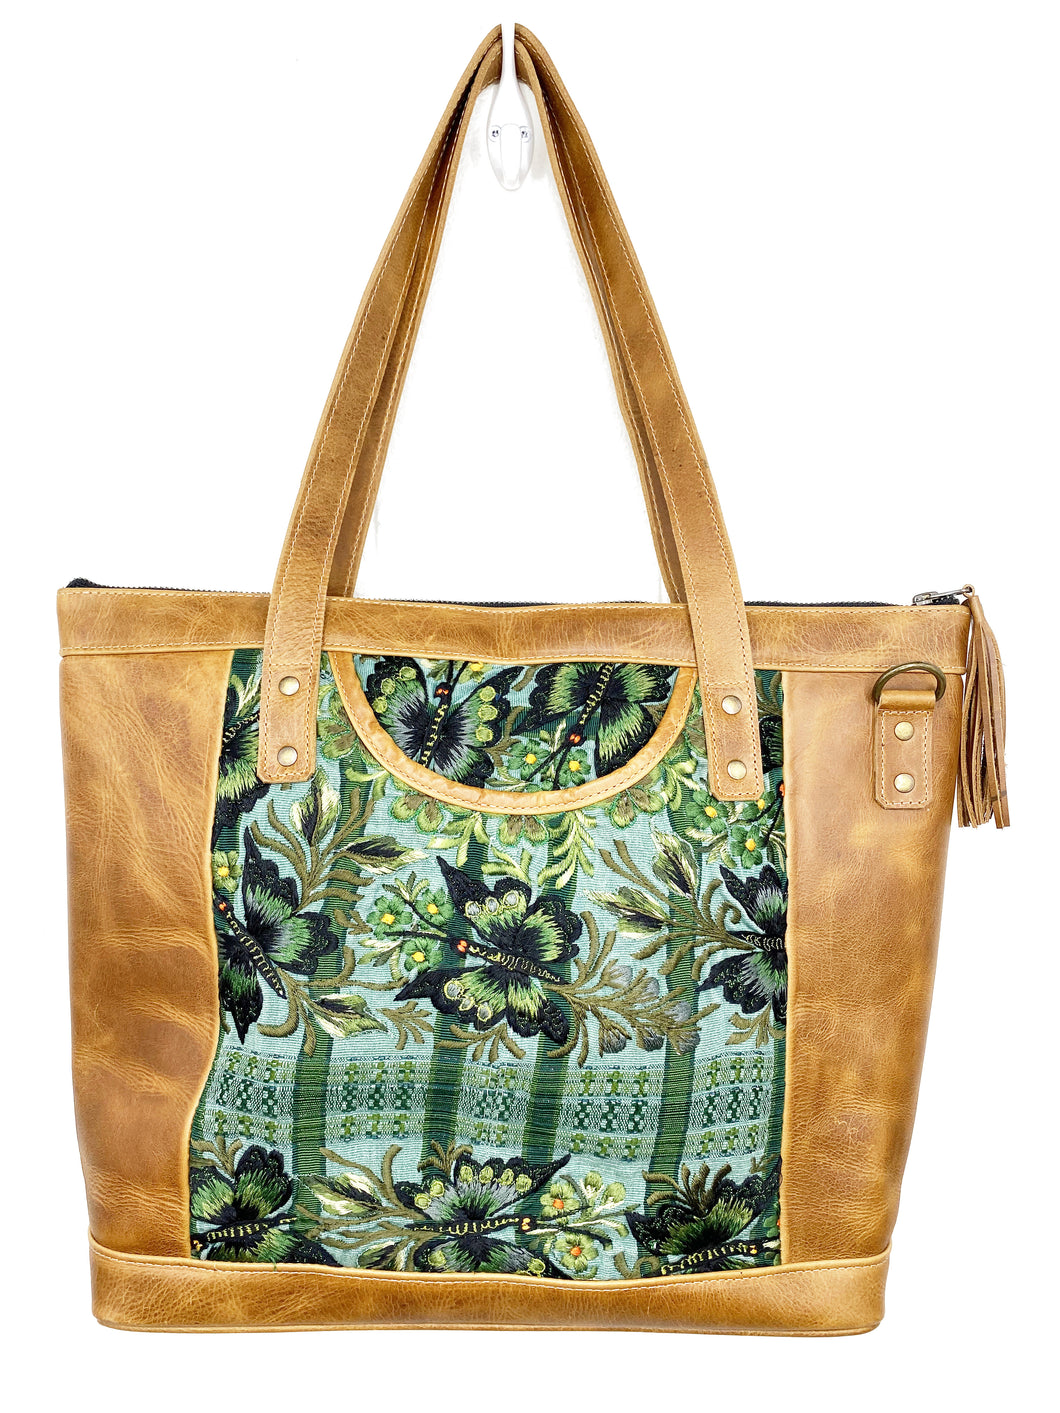 MoonLake Designs Olivia Large Tote Bag in light tan handcrafted leather with mesmerizing floral huipil design in shades of greens and leather tassel zipper closure